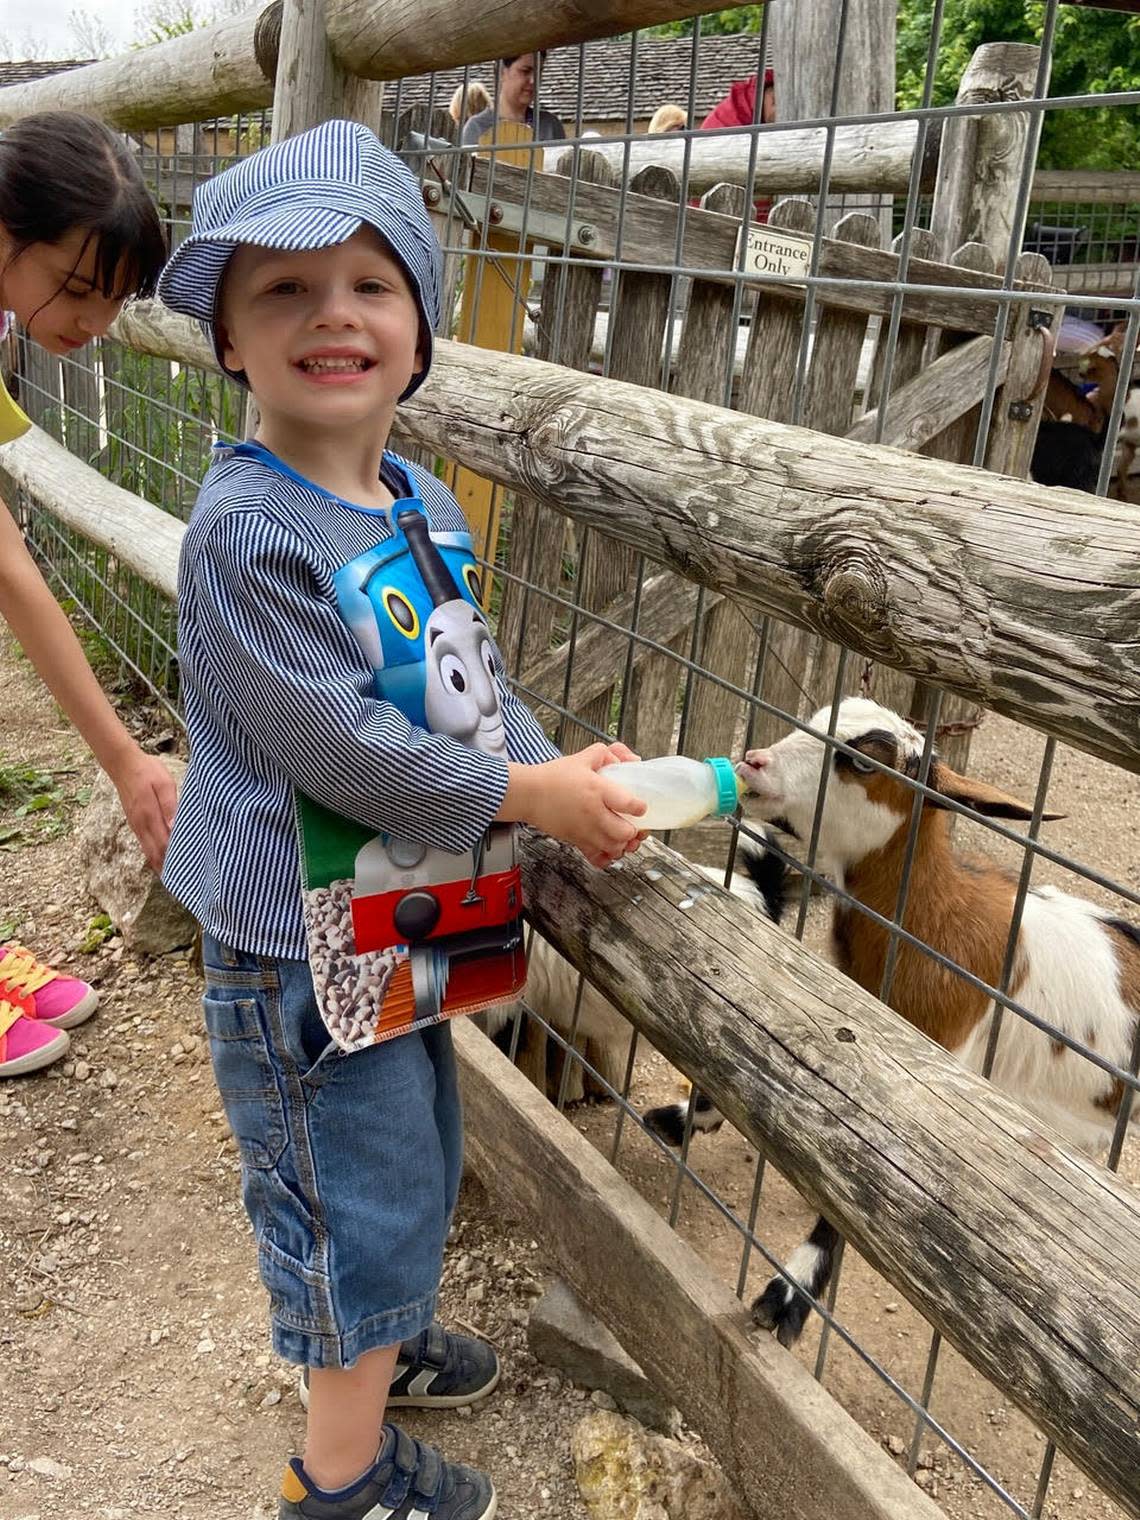 Deanna Rose Children’s Farmstead gives kids a chance to feed and pet farm animals.